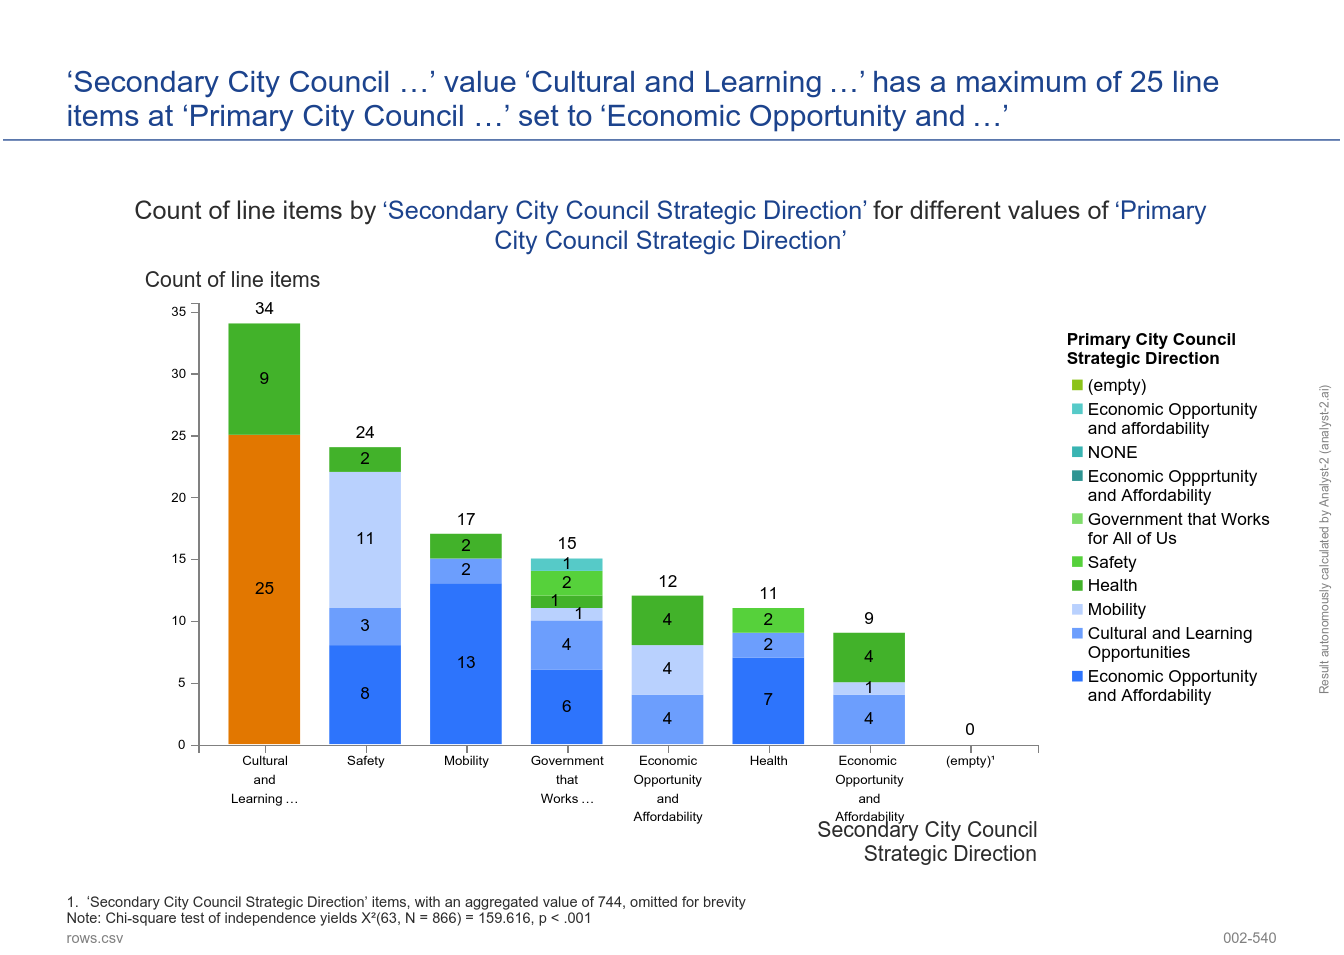 ‘Secondary City Council Strategic Direction’ value ‘Cultural and Learning Opportunities’ has a maximum of 25 line items at ‘Primary City Council Strategic Direction’ set to ‘Economic Opportunity and Affordability’. (Spirit Of East Austin Feedback Data - 002-540)